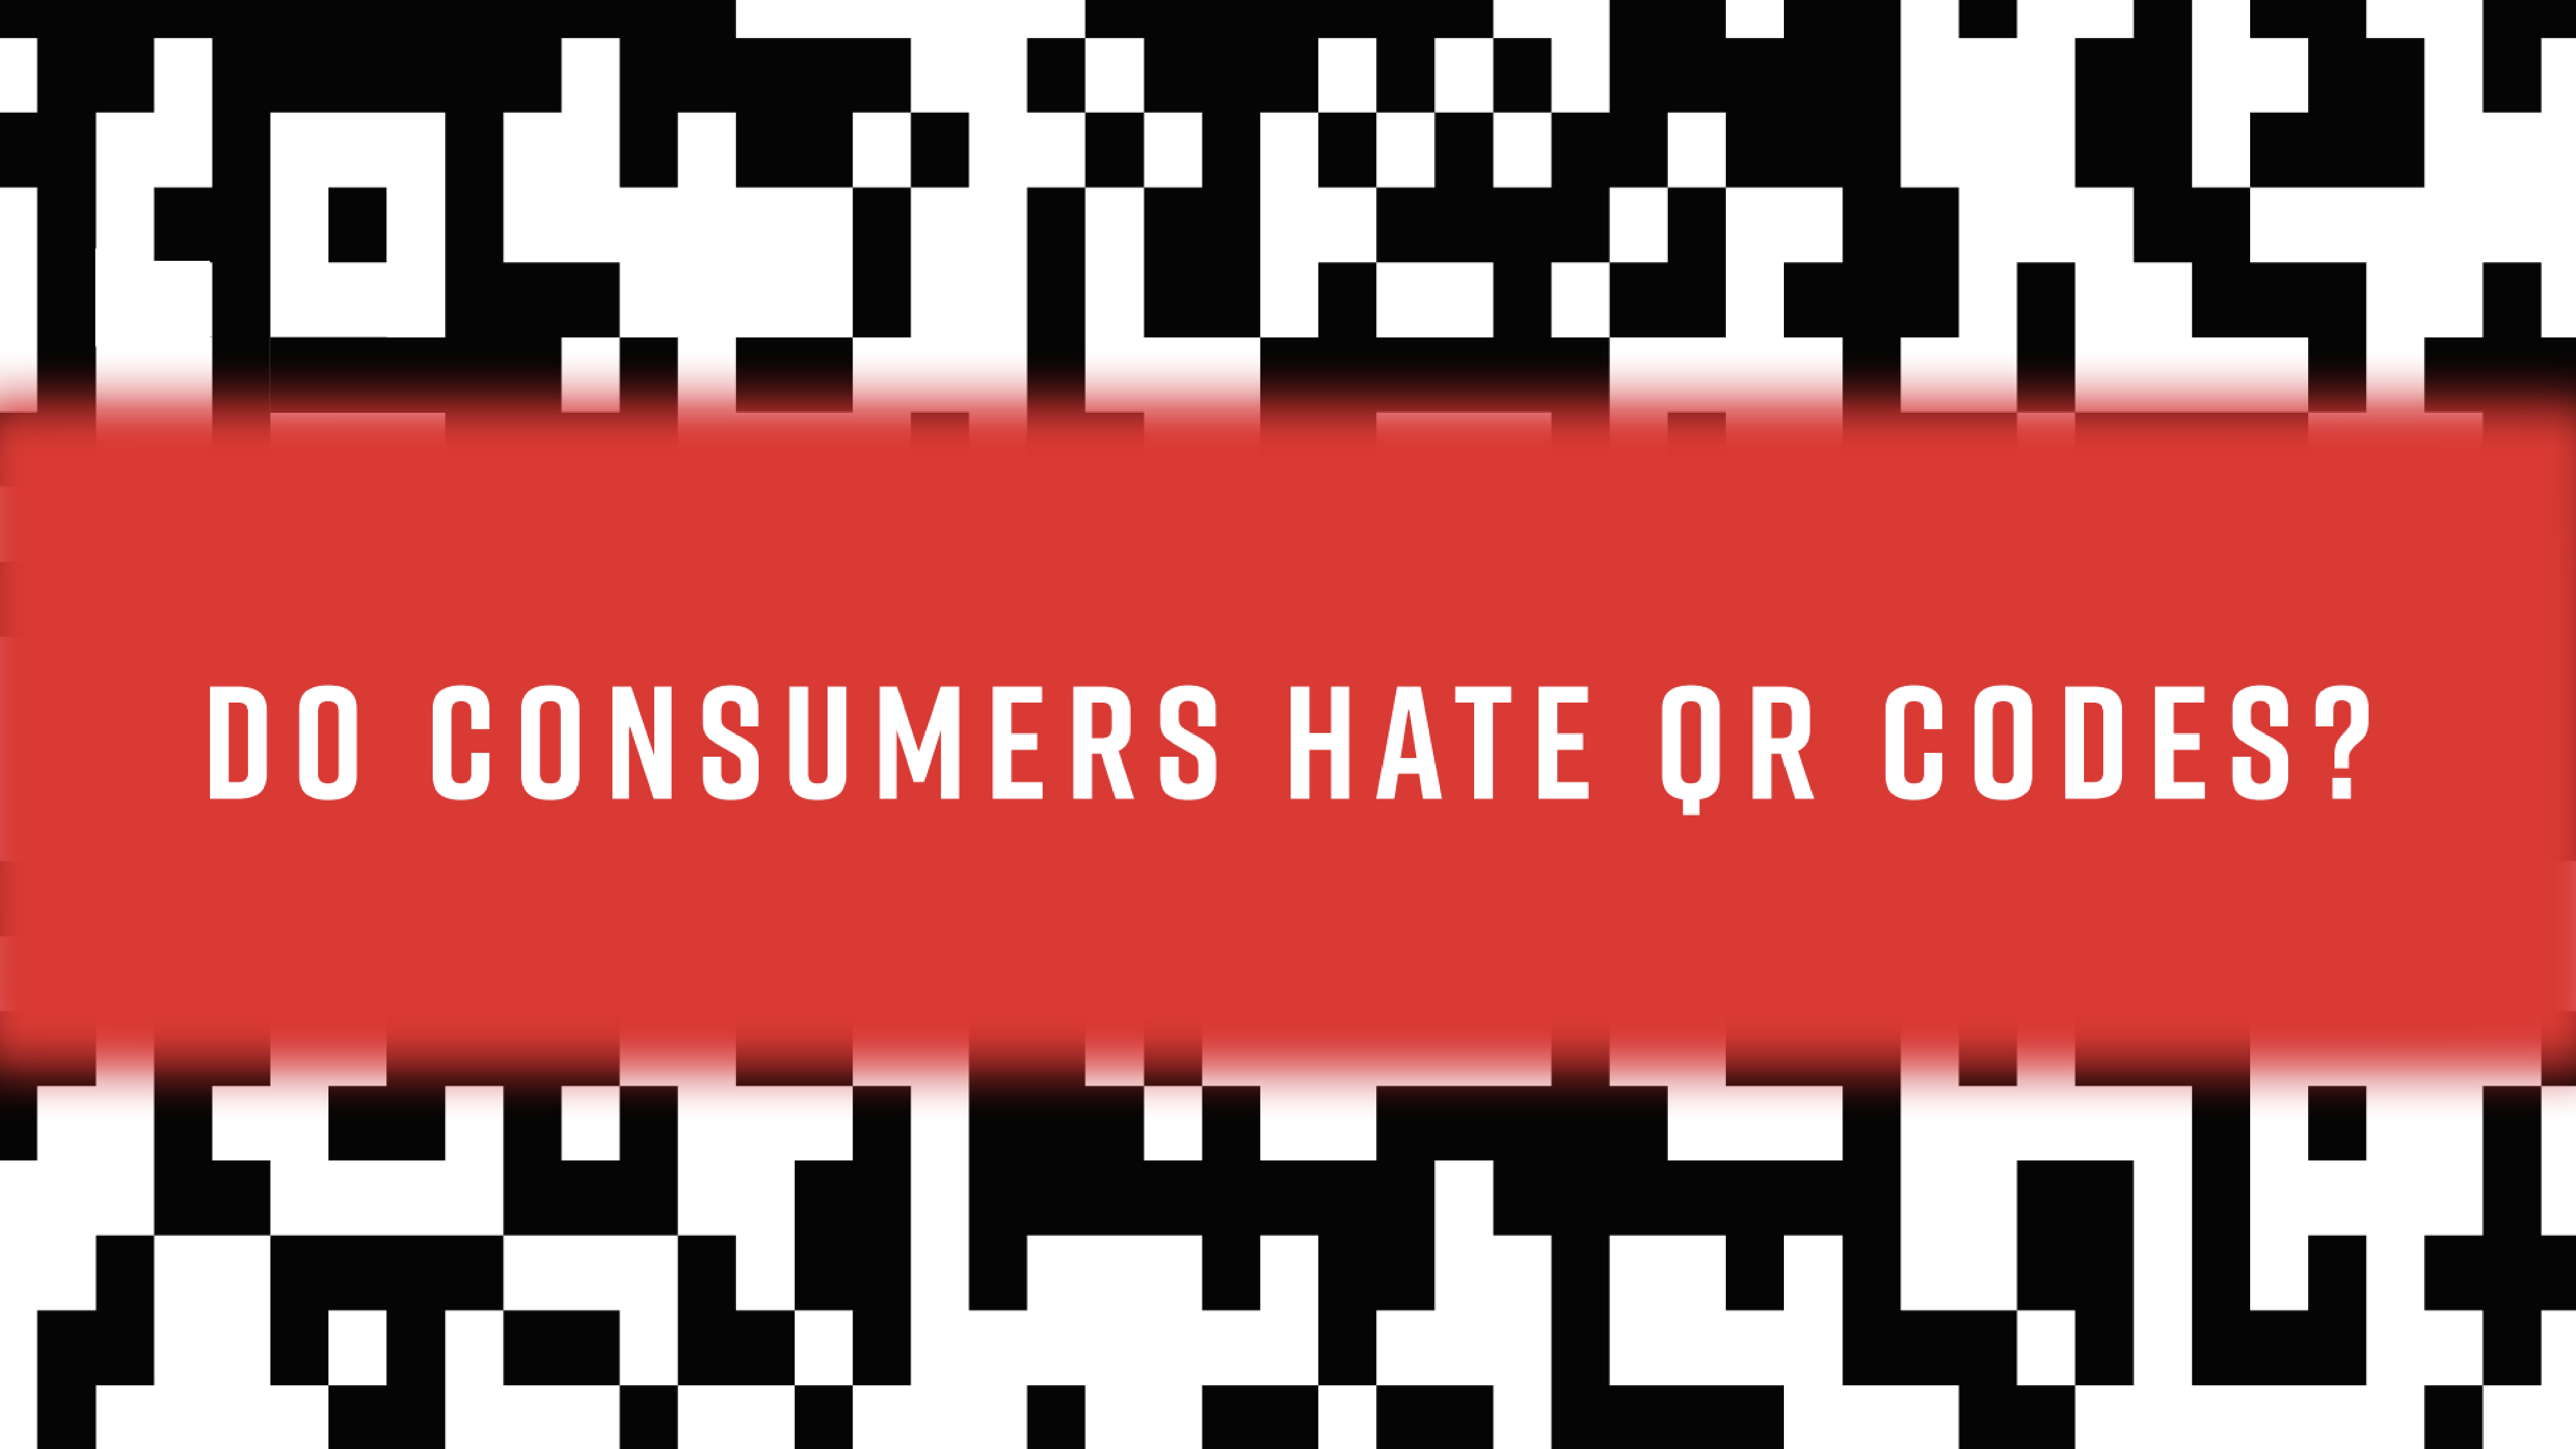 QR codes have popped up seemingly everywhere during the pandemic, but will they be a post-pandemic trend? Learn what consumers think of QR Codes as menus and forms of payment.